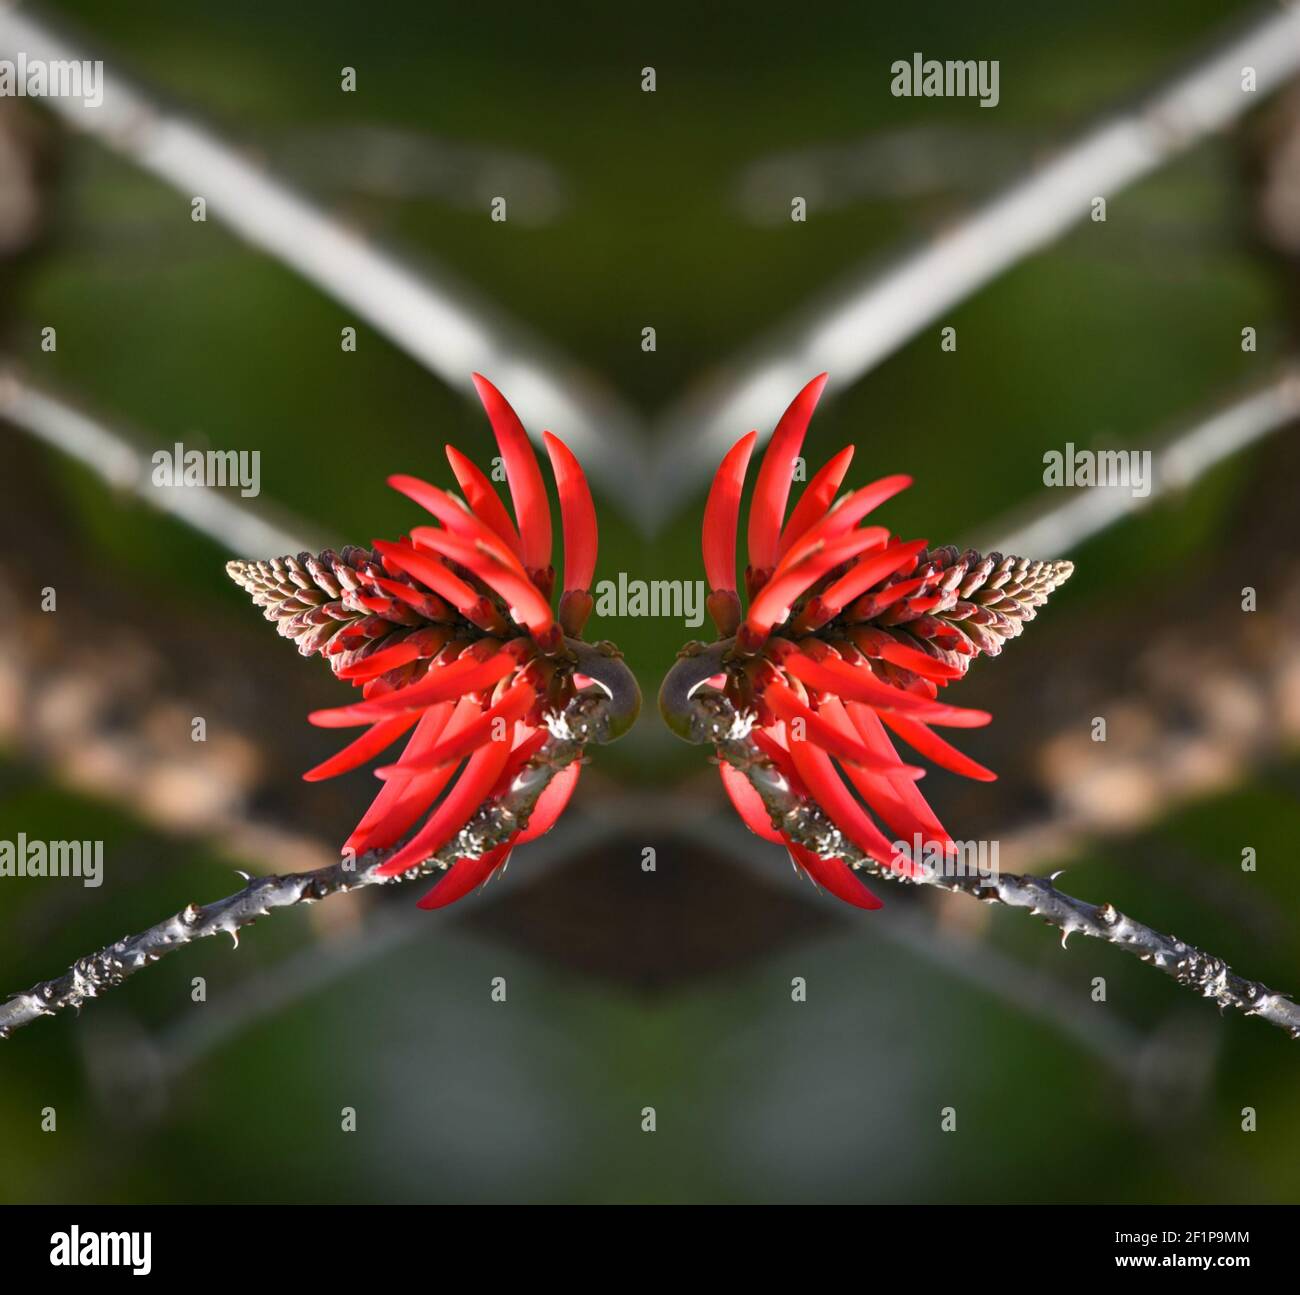 Erythrina speciosa (Coral tree) a tropical plant with vibrant coral-orange flower spikes on an abstract composition. Stock Photo